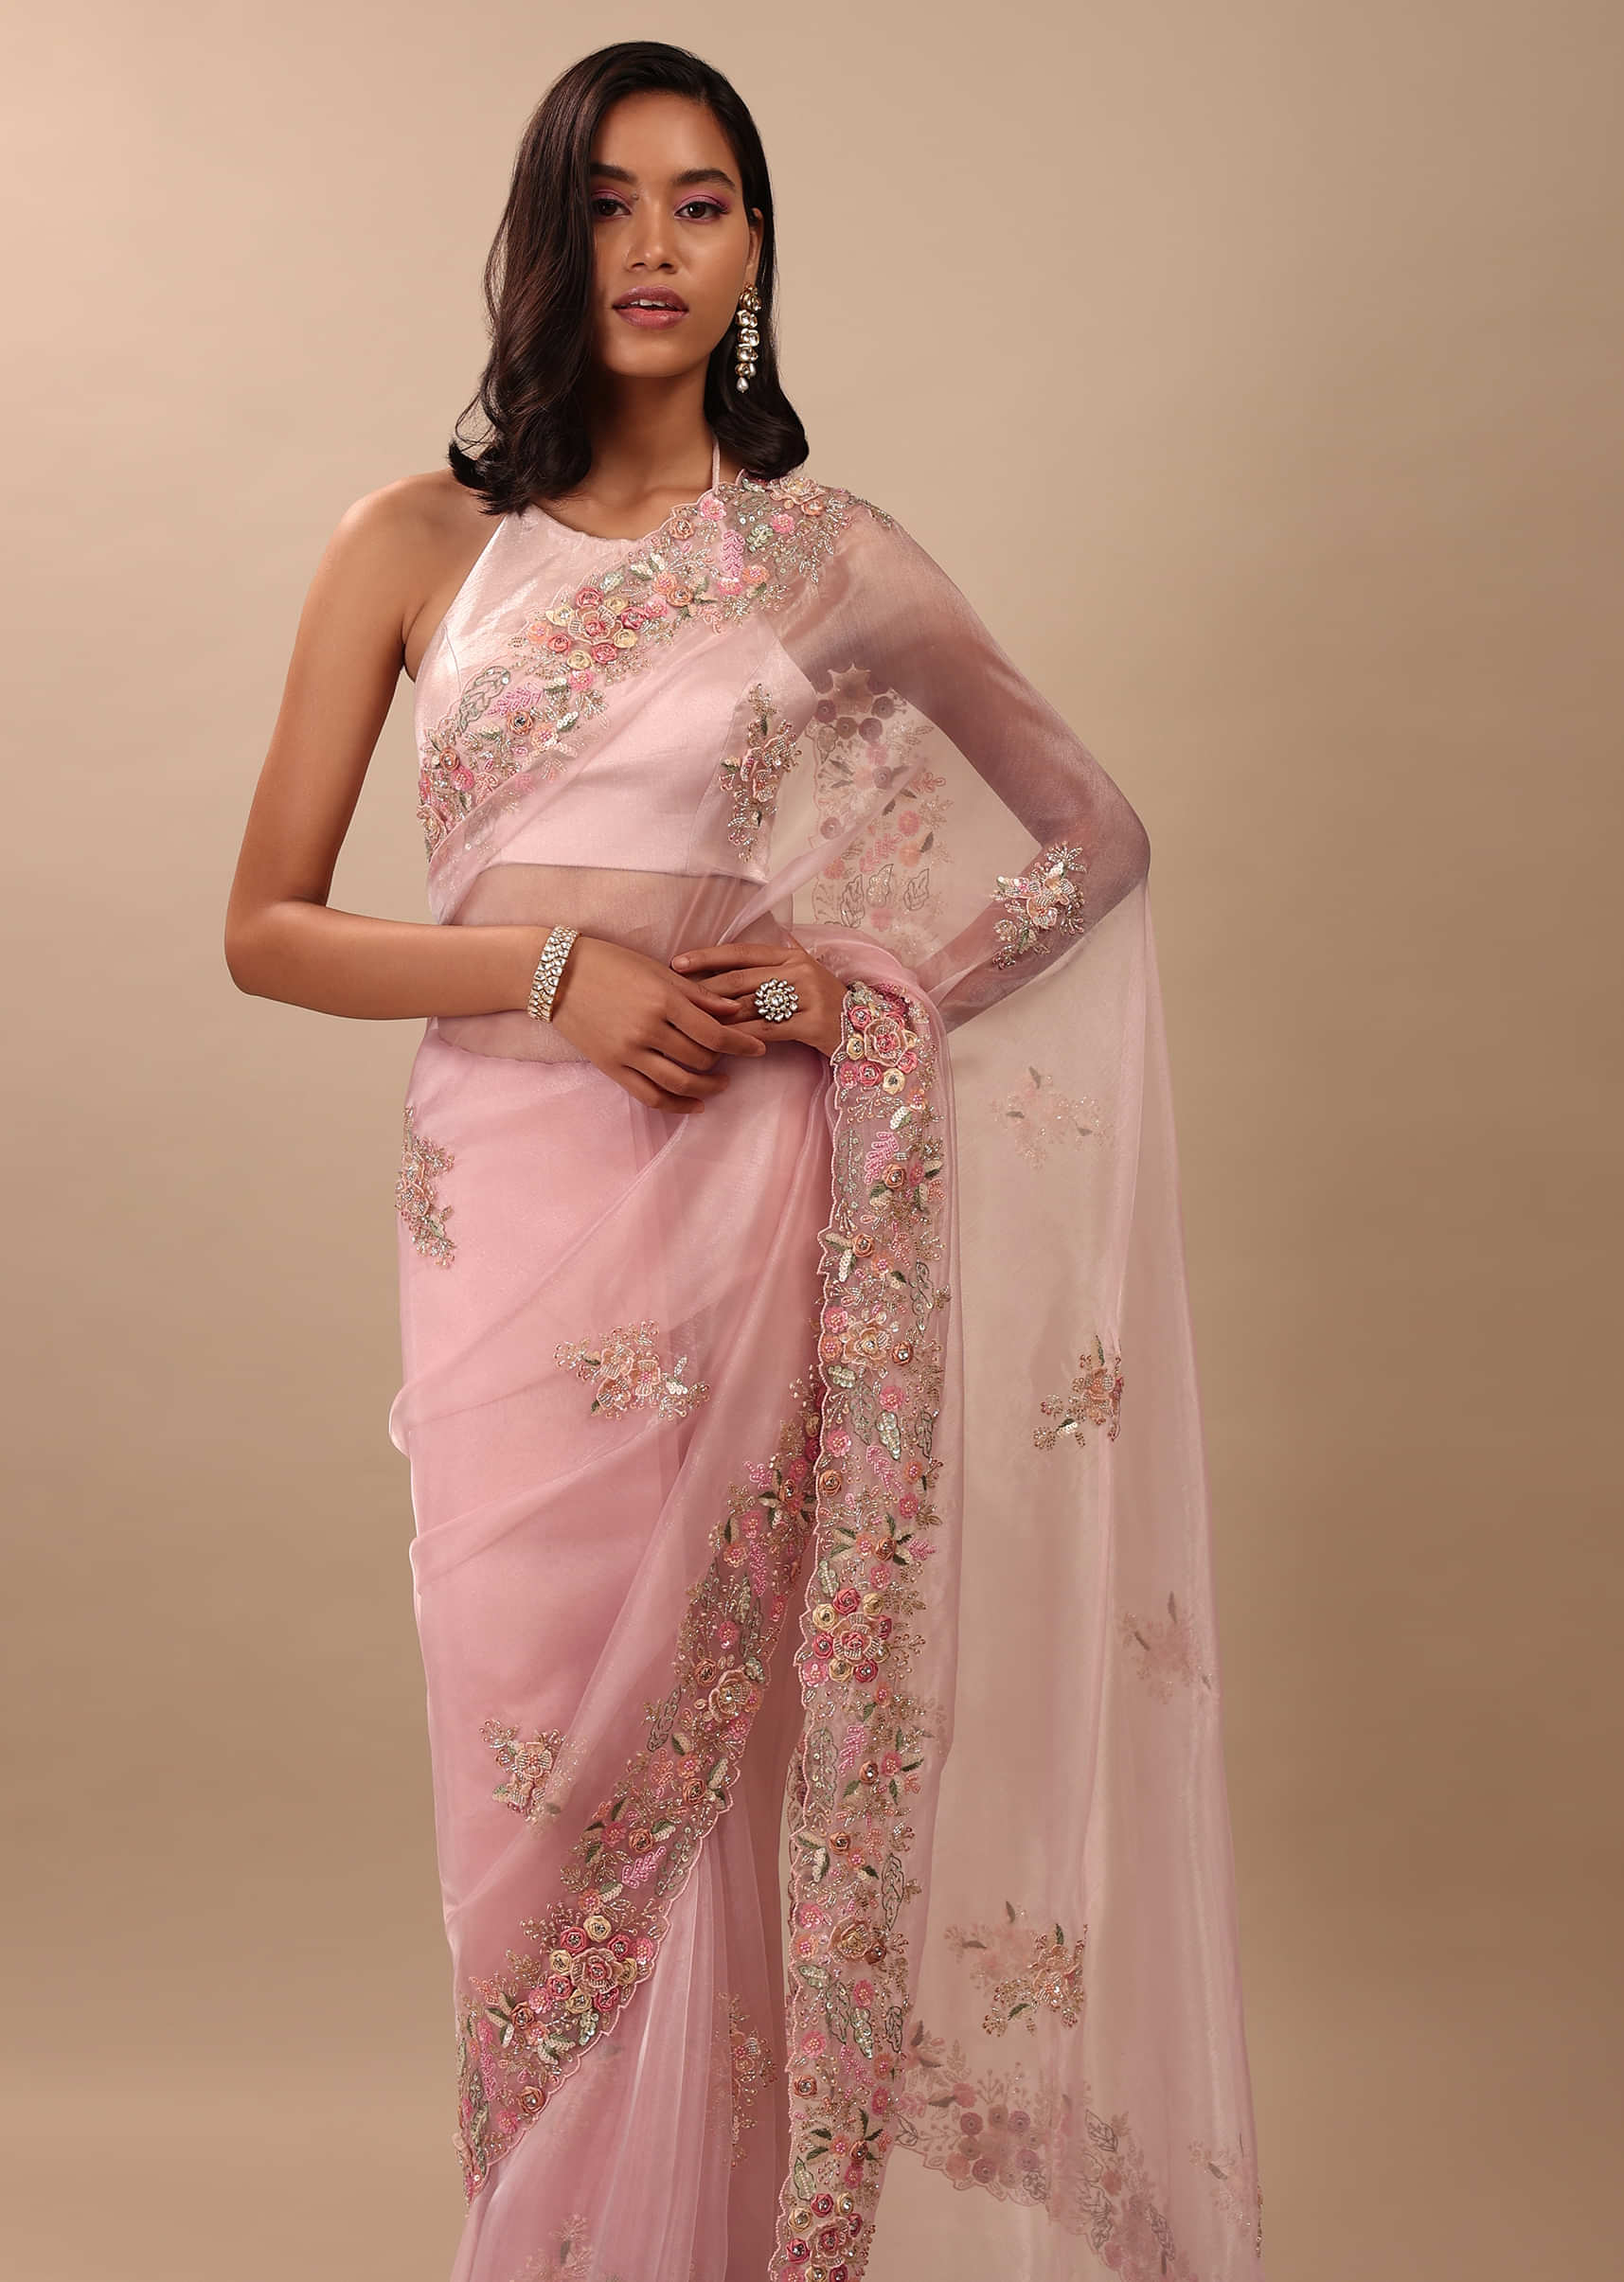 Blush Pink Saree In Glass Tissue With 3D Floral Embroidery In Moti, Sequin & Cut Dana